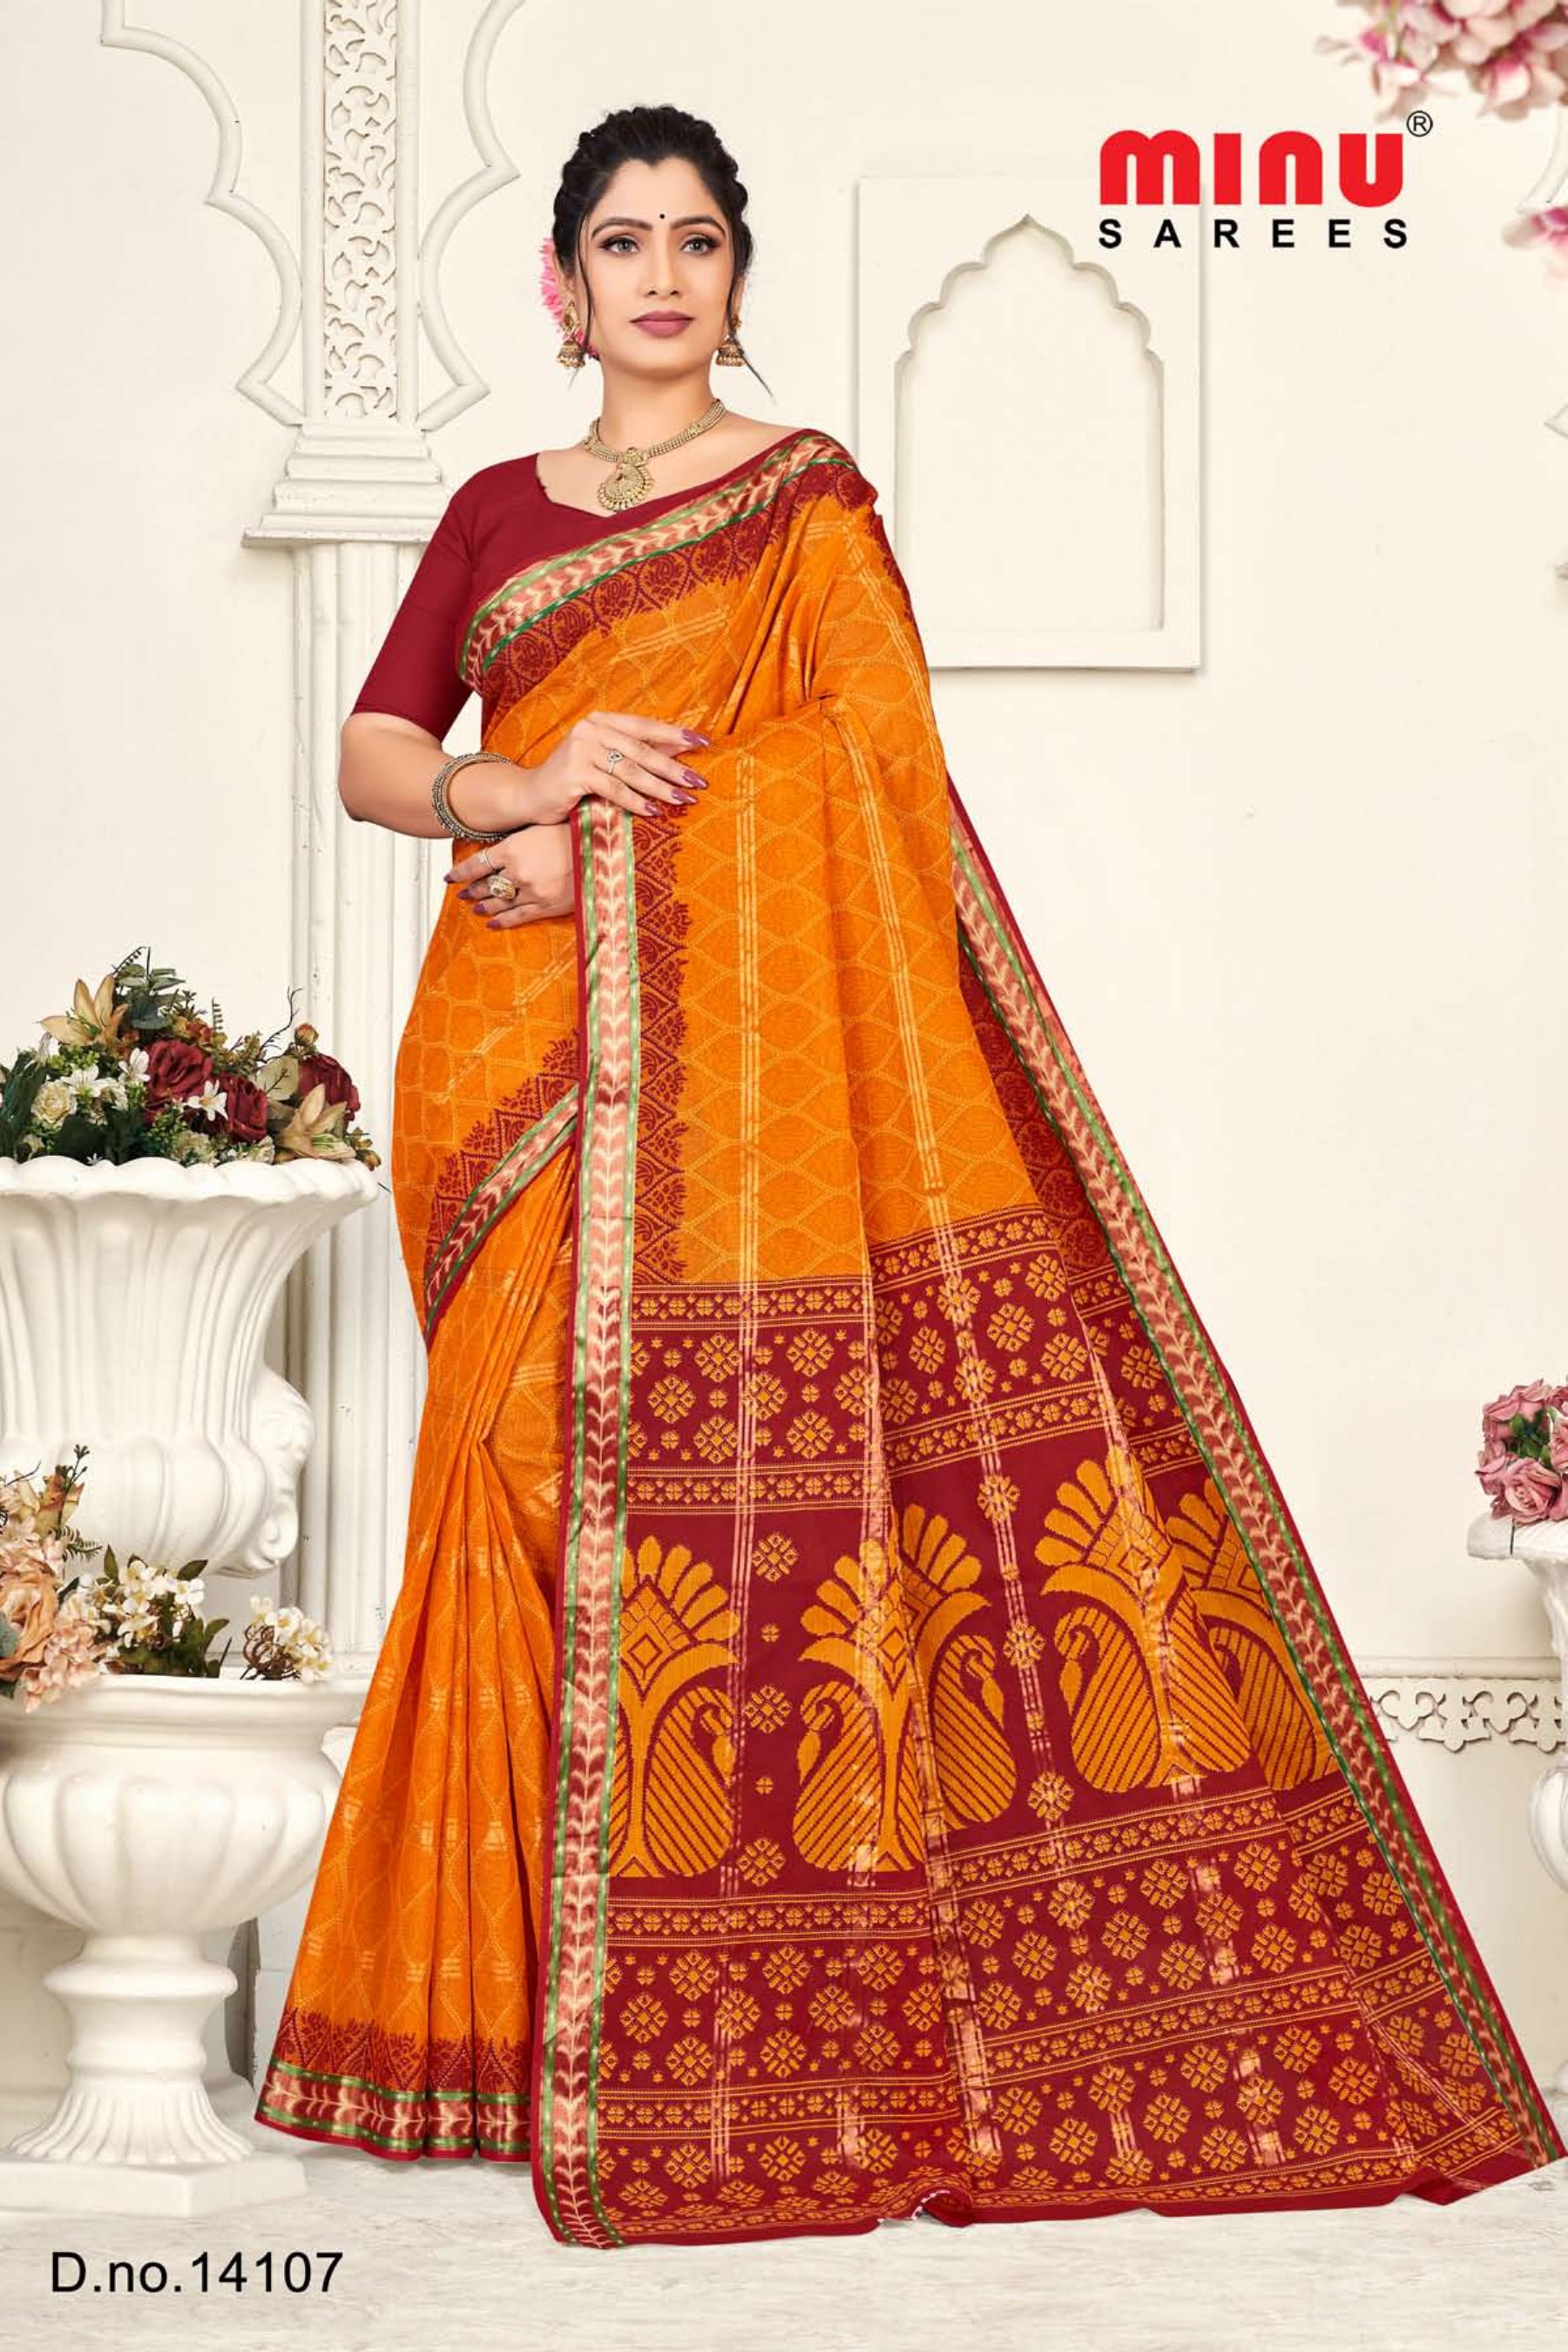 online image of orange cotton saree for resellers